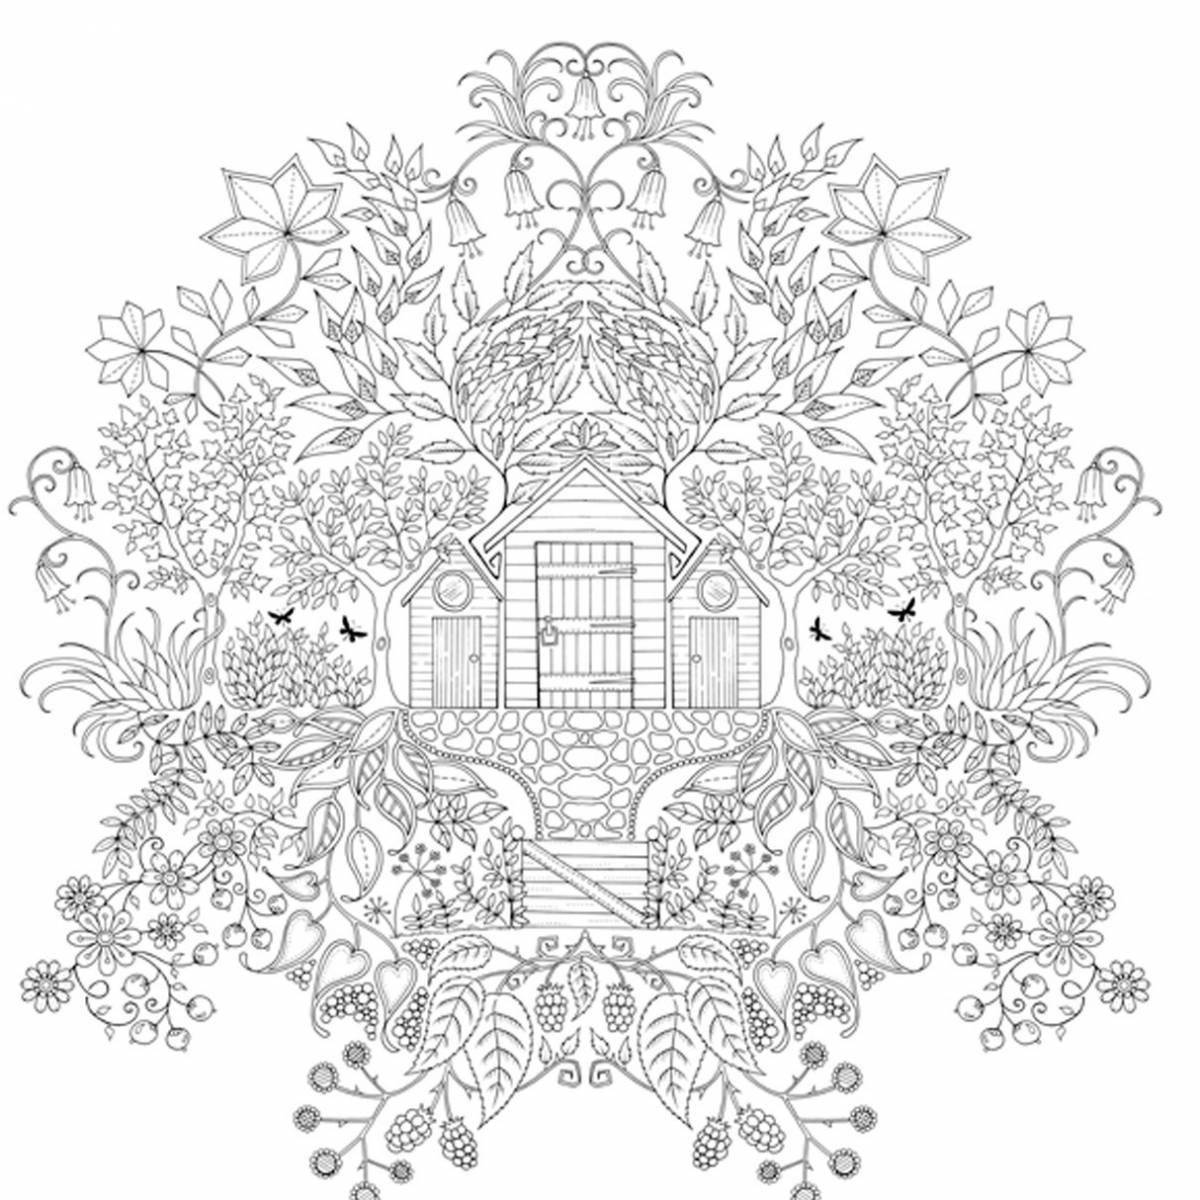 Joanna Basford's intricate coloring page